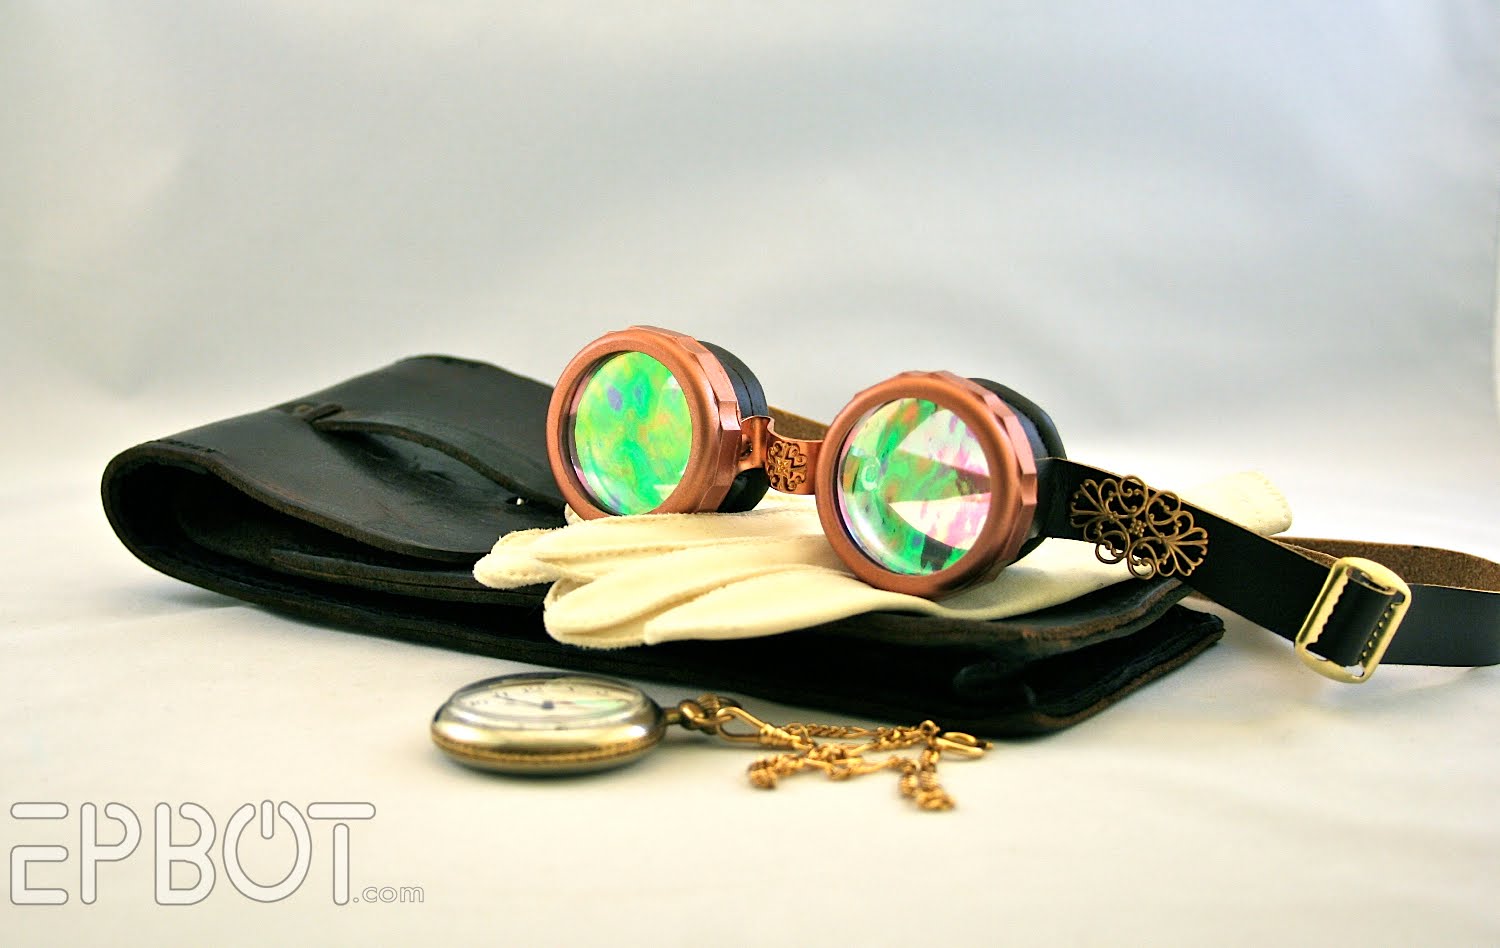 EPBOT: How To Make: Steampunk Goggles